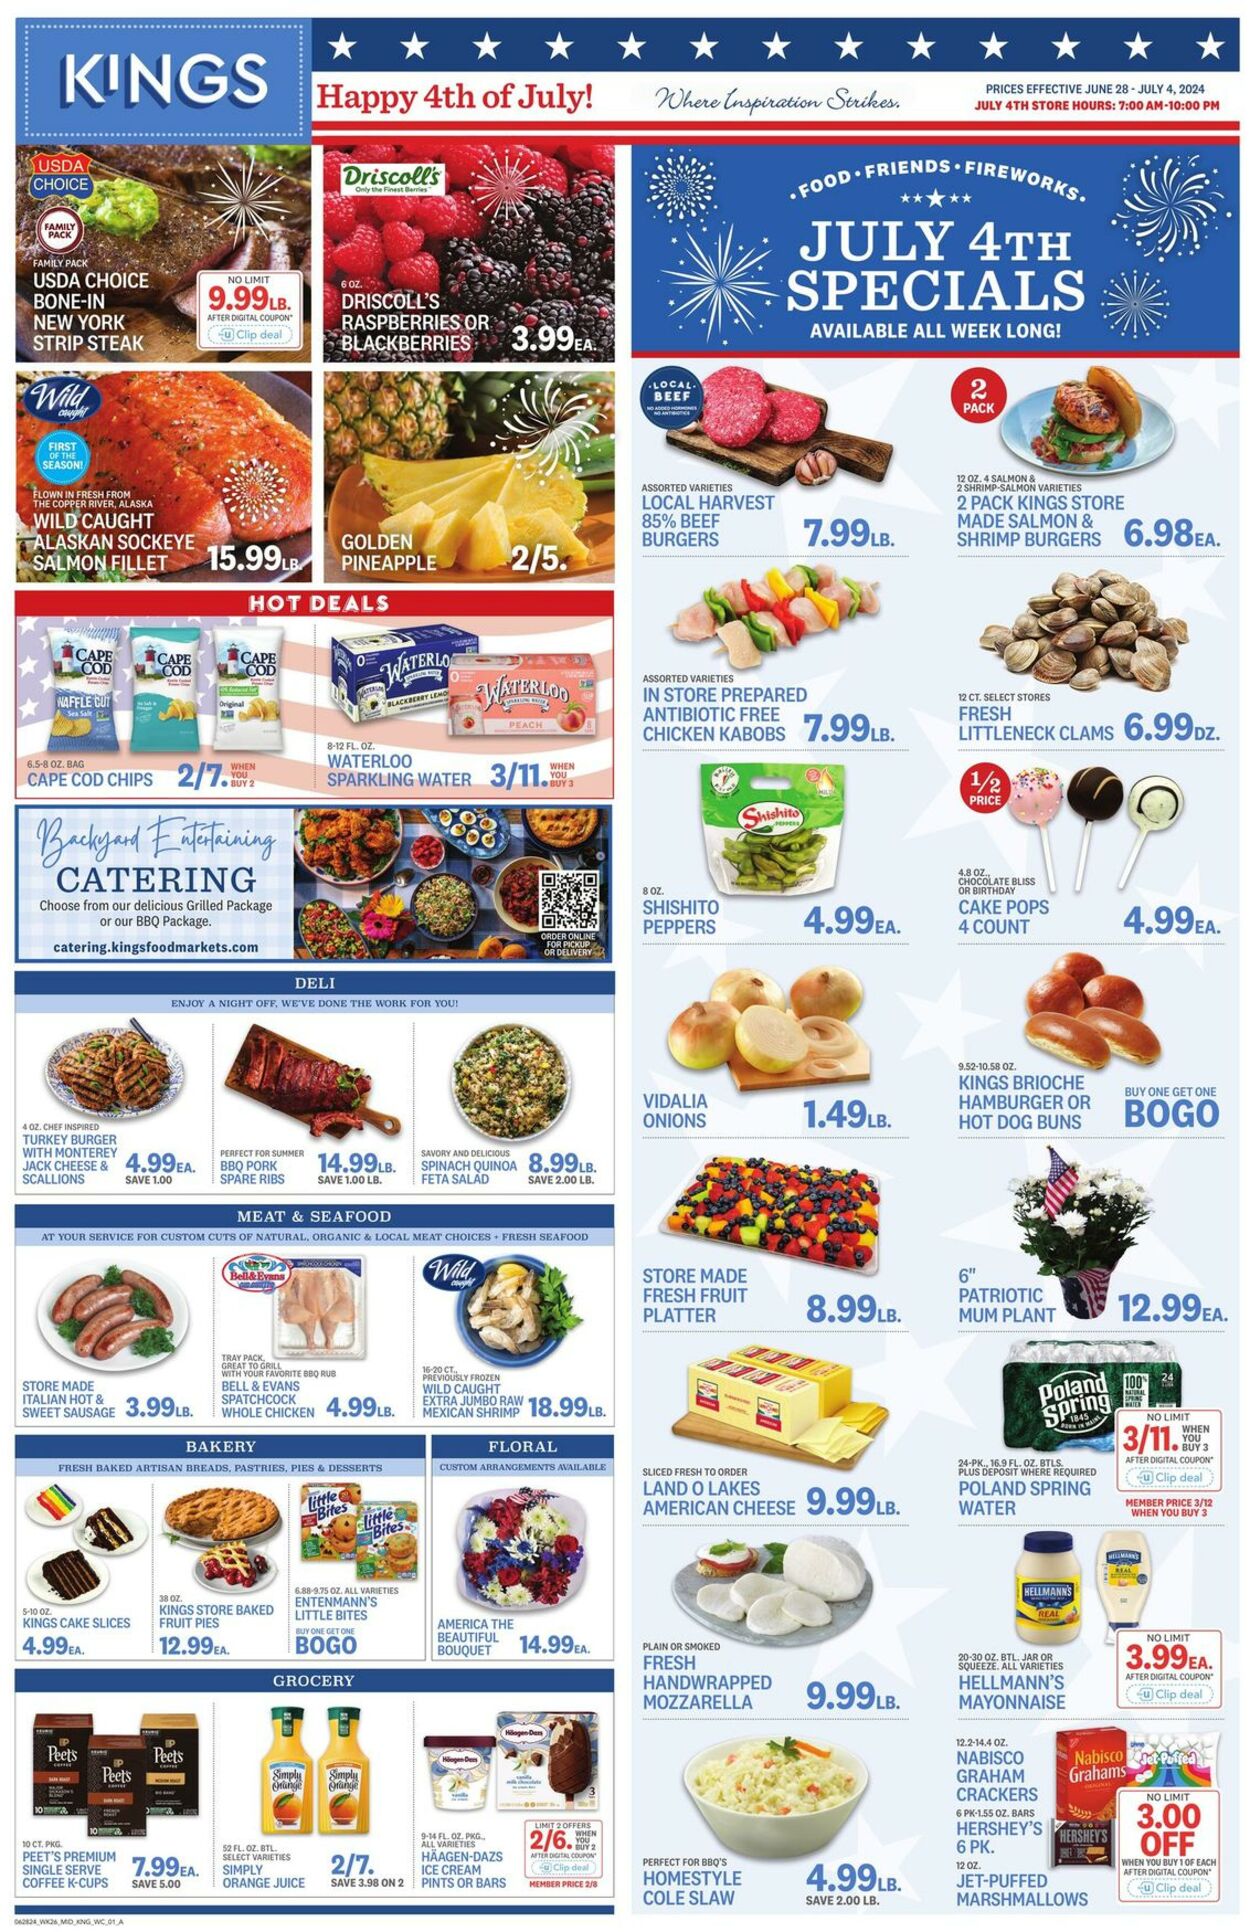 Kings Food Markets Promotional weekly ads